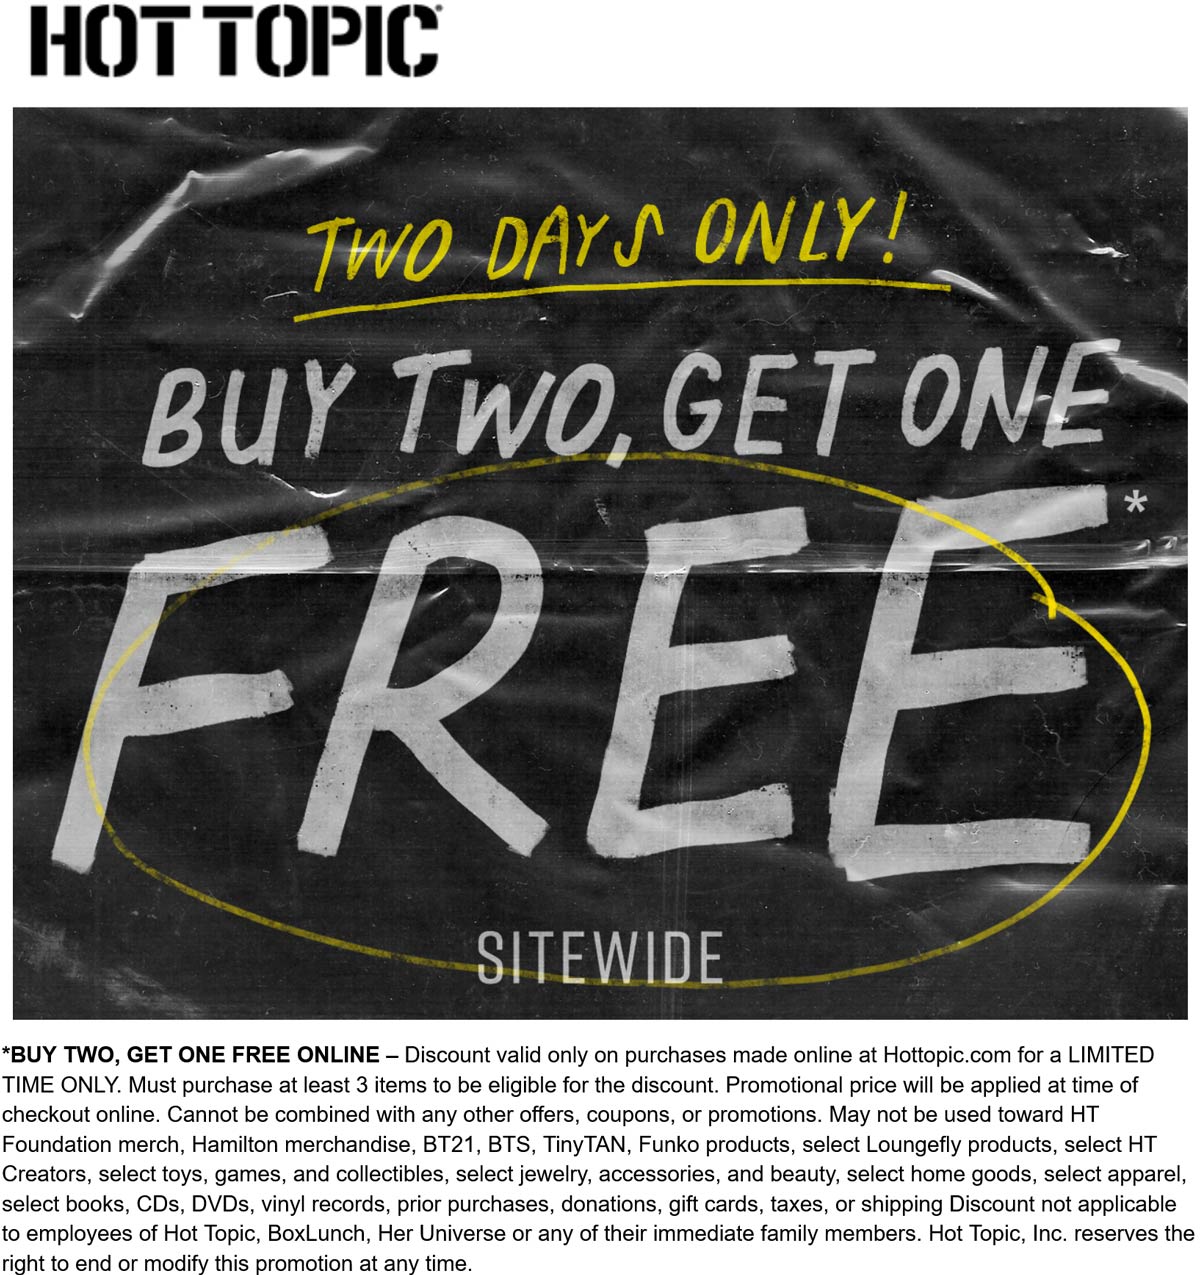 Hot Topic stores Coupon  3rd item free online at Hot Topic #hottopic 